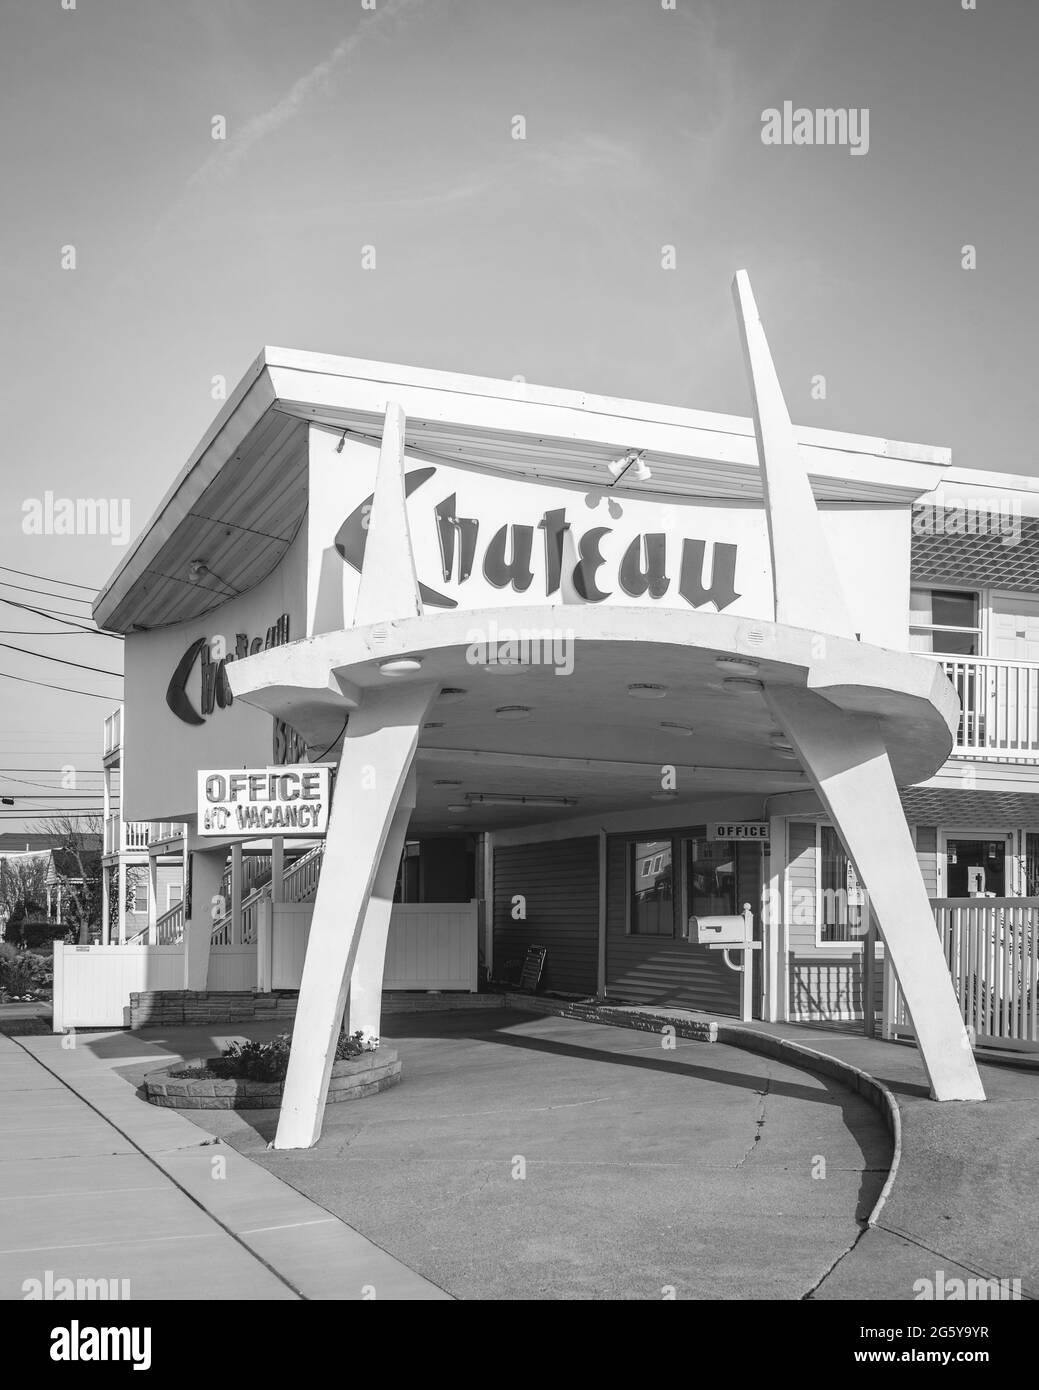 The Chateau Bleu Motel, in Wildwood, New Jersey Stock Photo